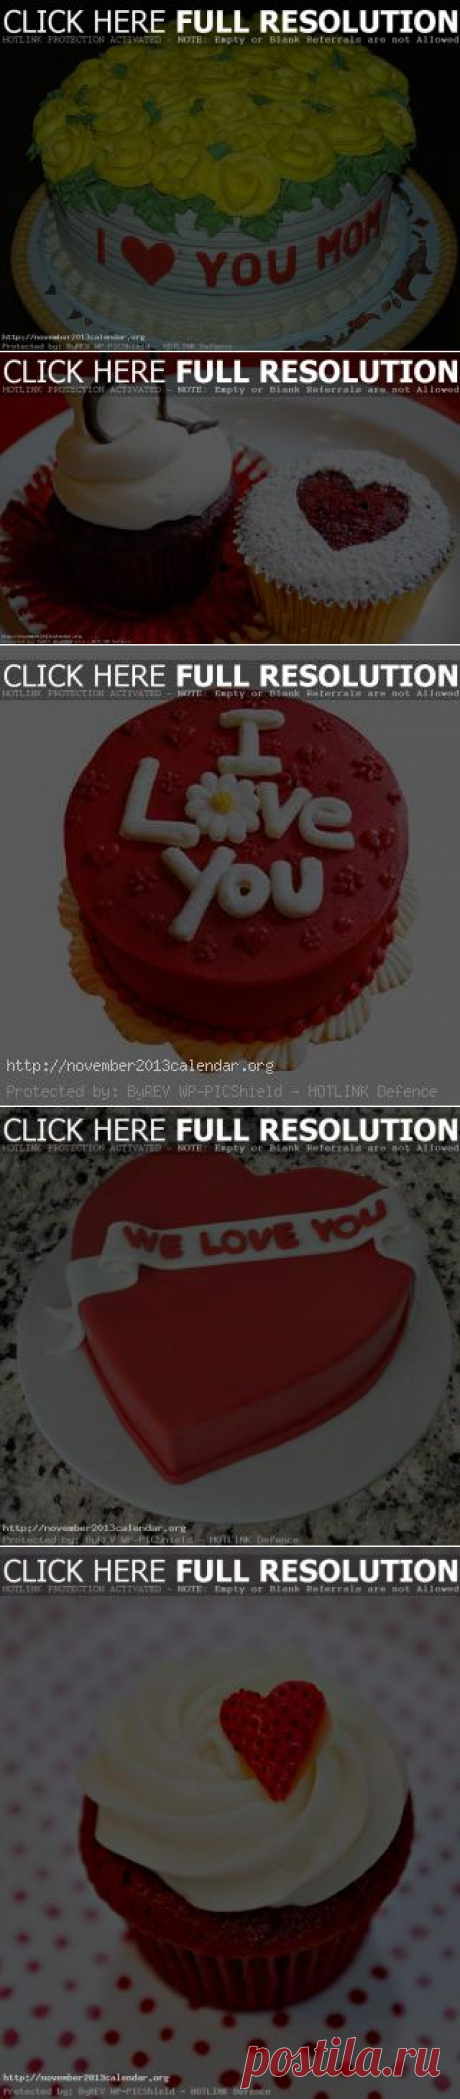 Birthday Cake I Love You Romantic with Heart | Download Free Word, Excel, PDF